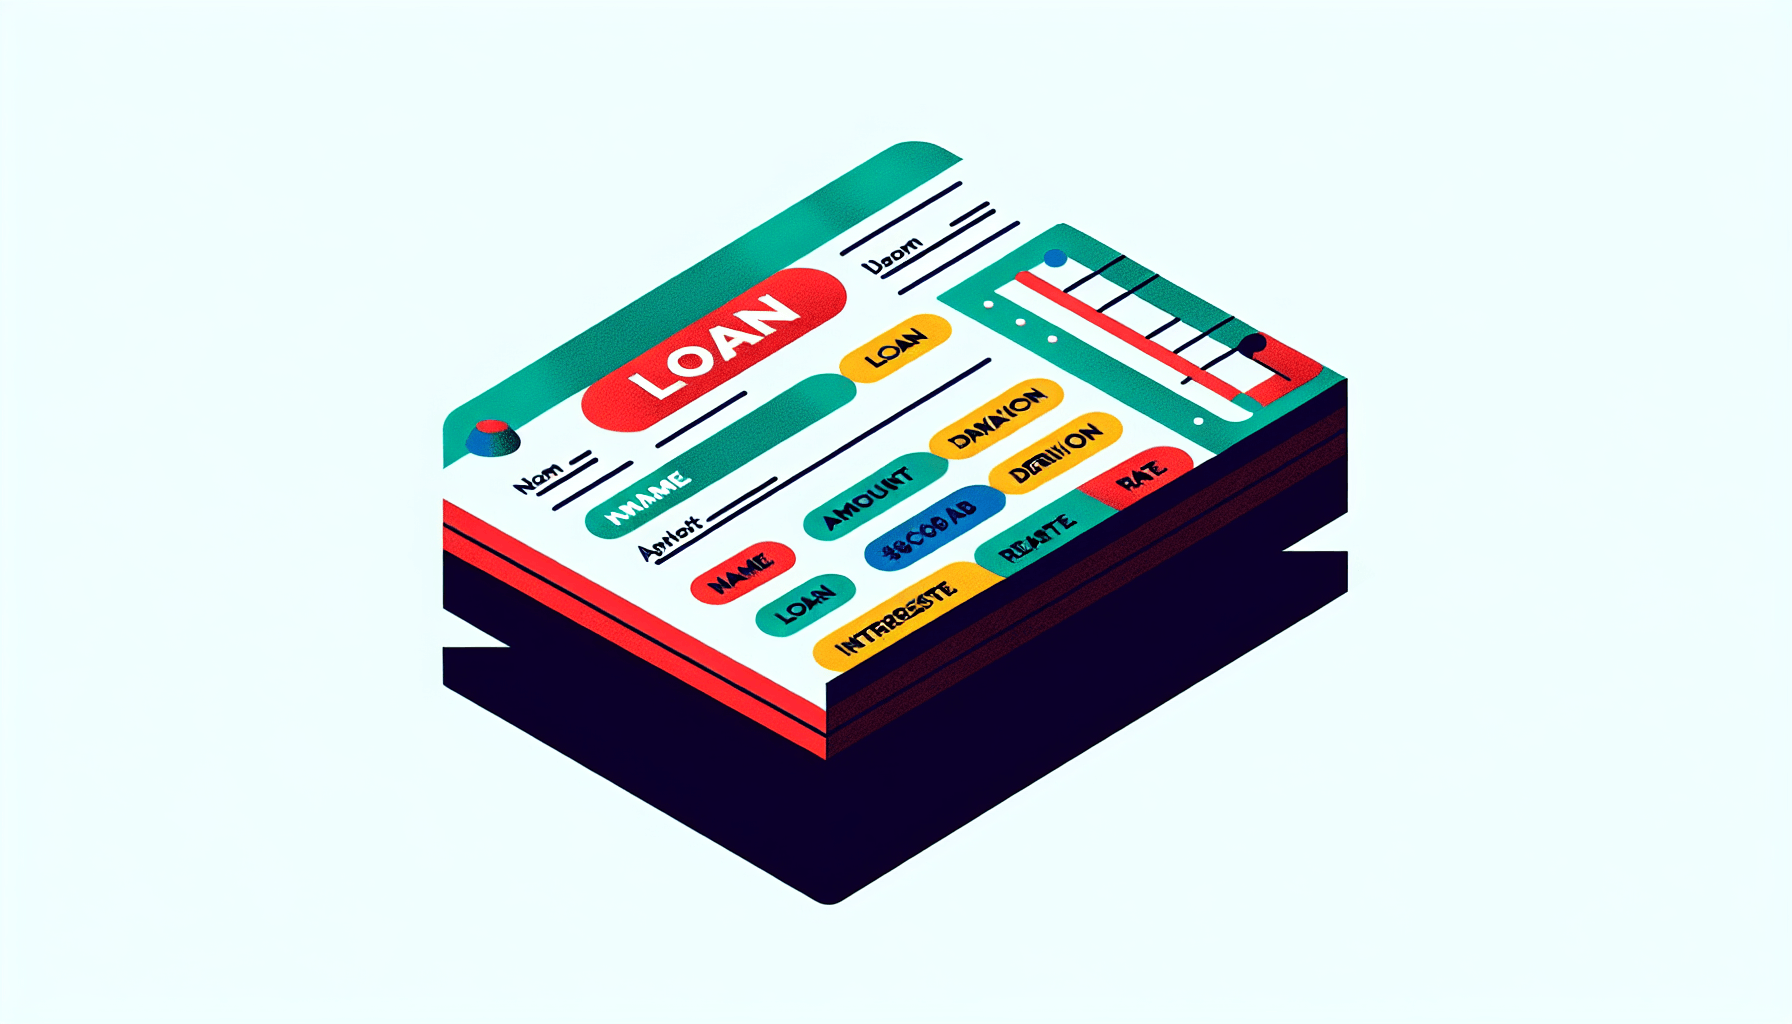 Loan form in flat illustration style and white background, red #f47574, green #88c7a8, yellow #fcc44b, and blue #645bc8 colors.